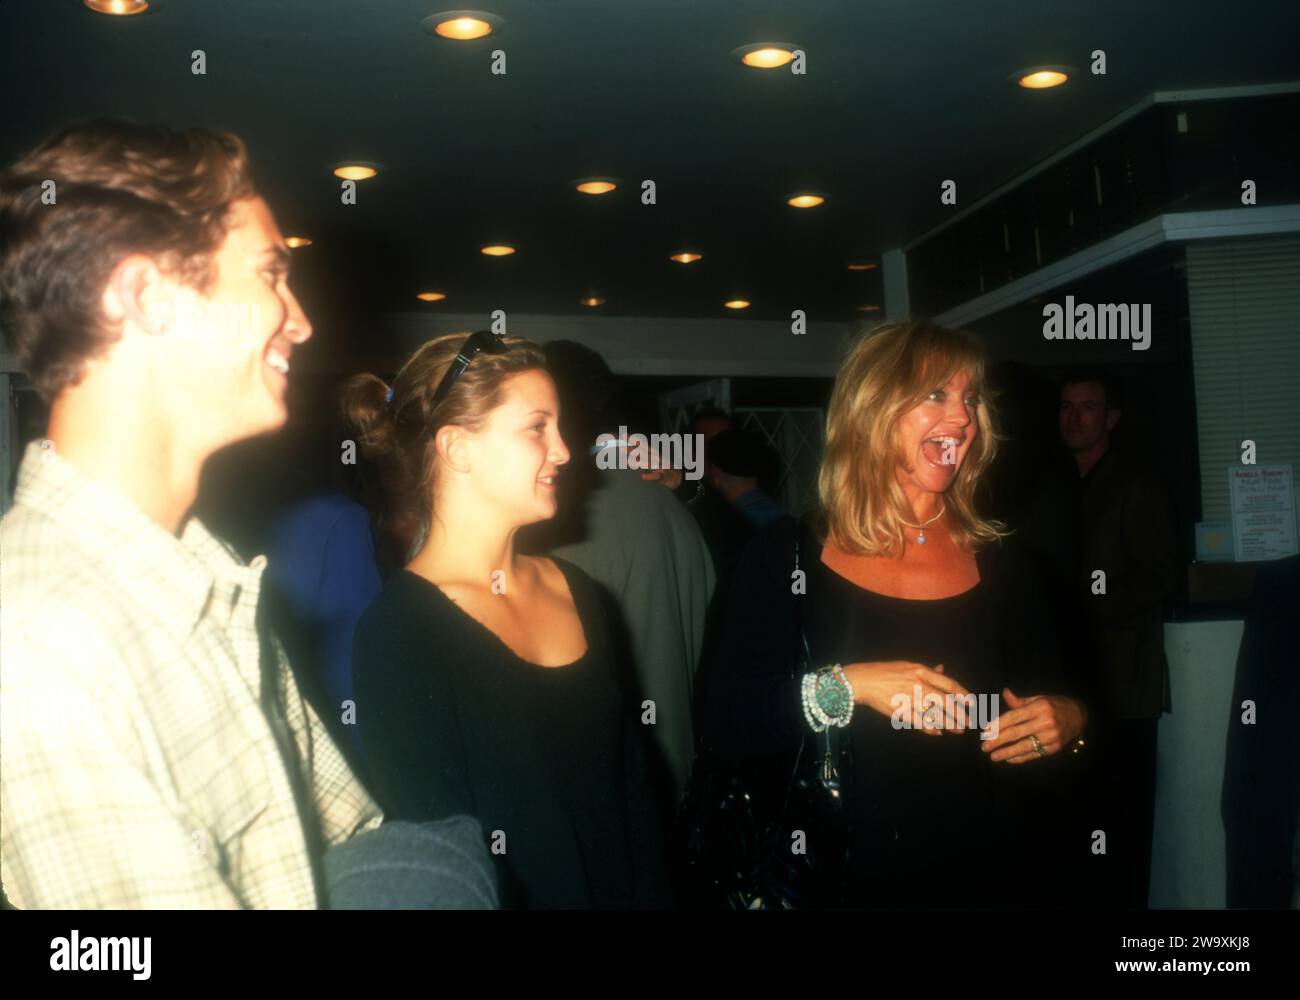 Los Angeles, California, USA 13th October 1996 (Exclusive) Actor Oliver Hudson, Actress Kate Hudson and mother Actress Goldie Hawn on October 13, 1996 in Los Angeles, California, USA. Photo by Barry King/Alamy Stock Photo Stock Photo